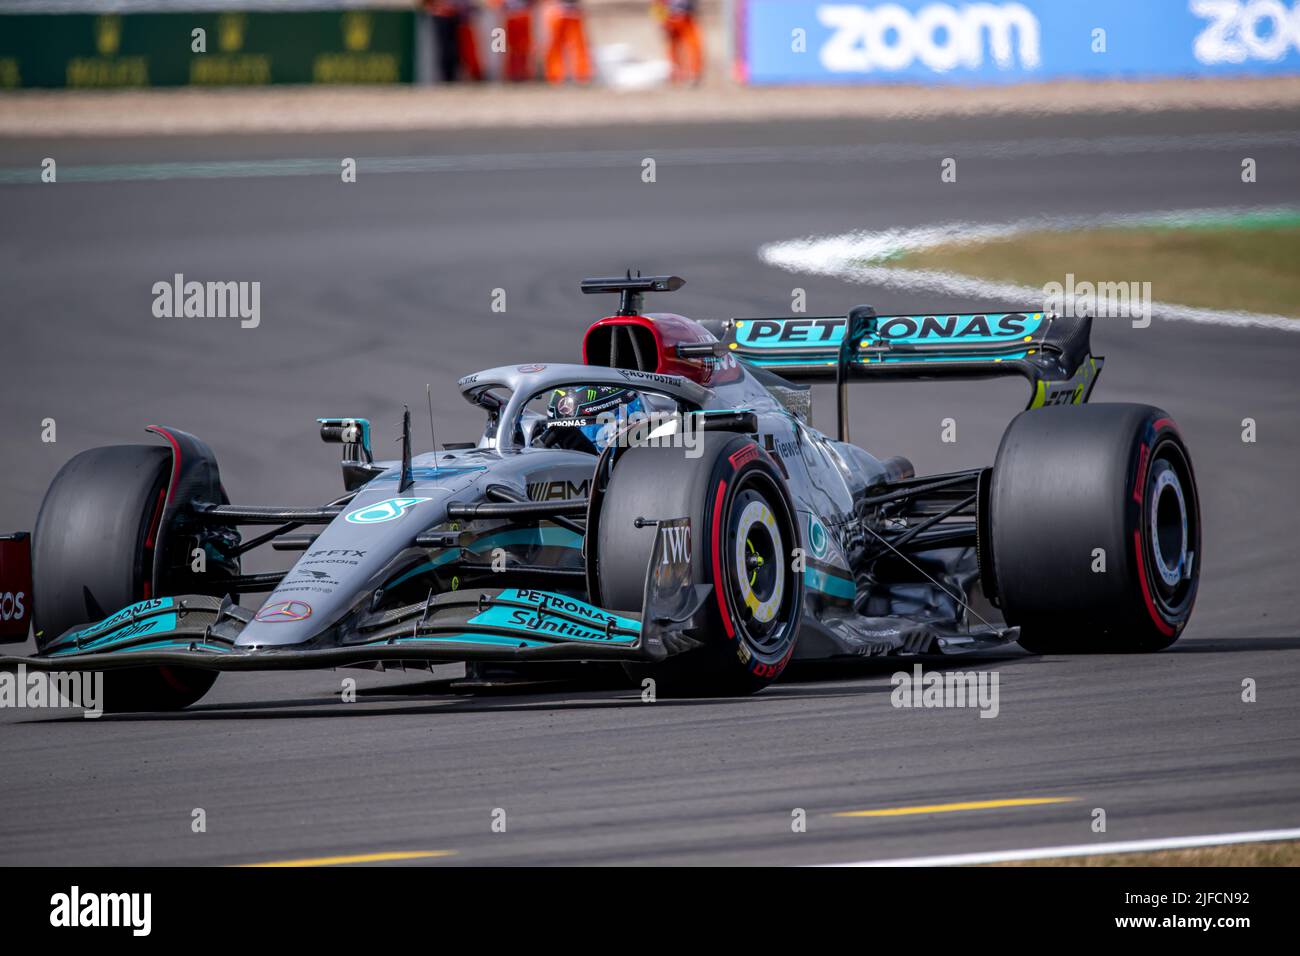 Silverstone, UK, 01st Jul 2022, George Russell, from the UK competes for Mercedes AMG . Practice, round 10 of the 2022 Formula 1 championship. Credit: Michael Potts/Alamy Live News Stock Photo